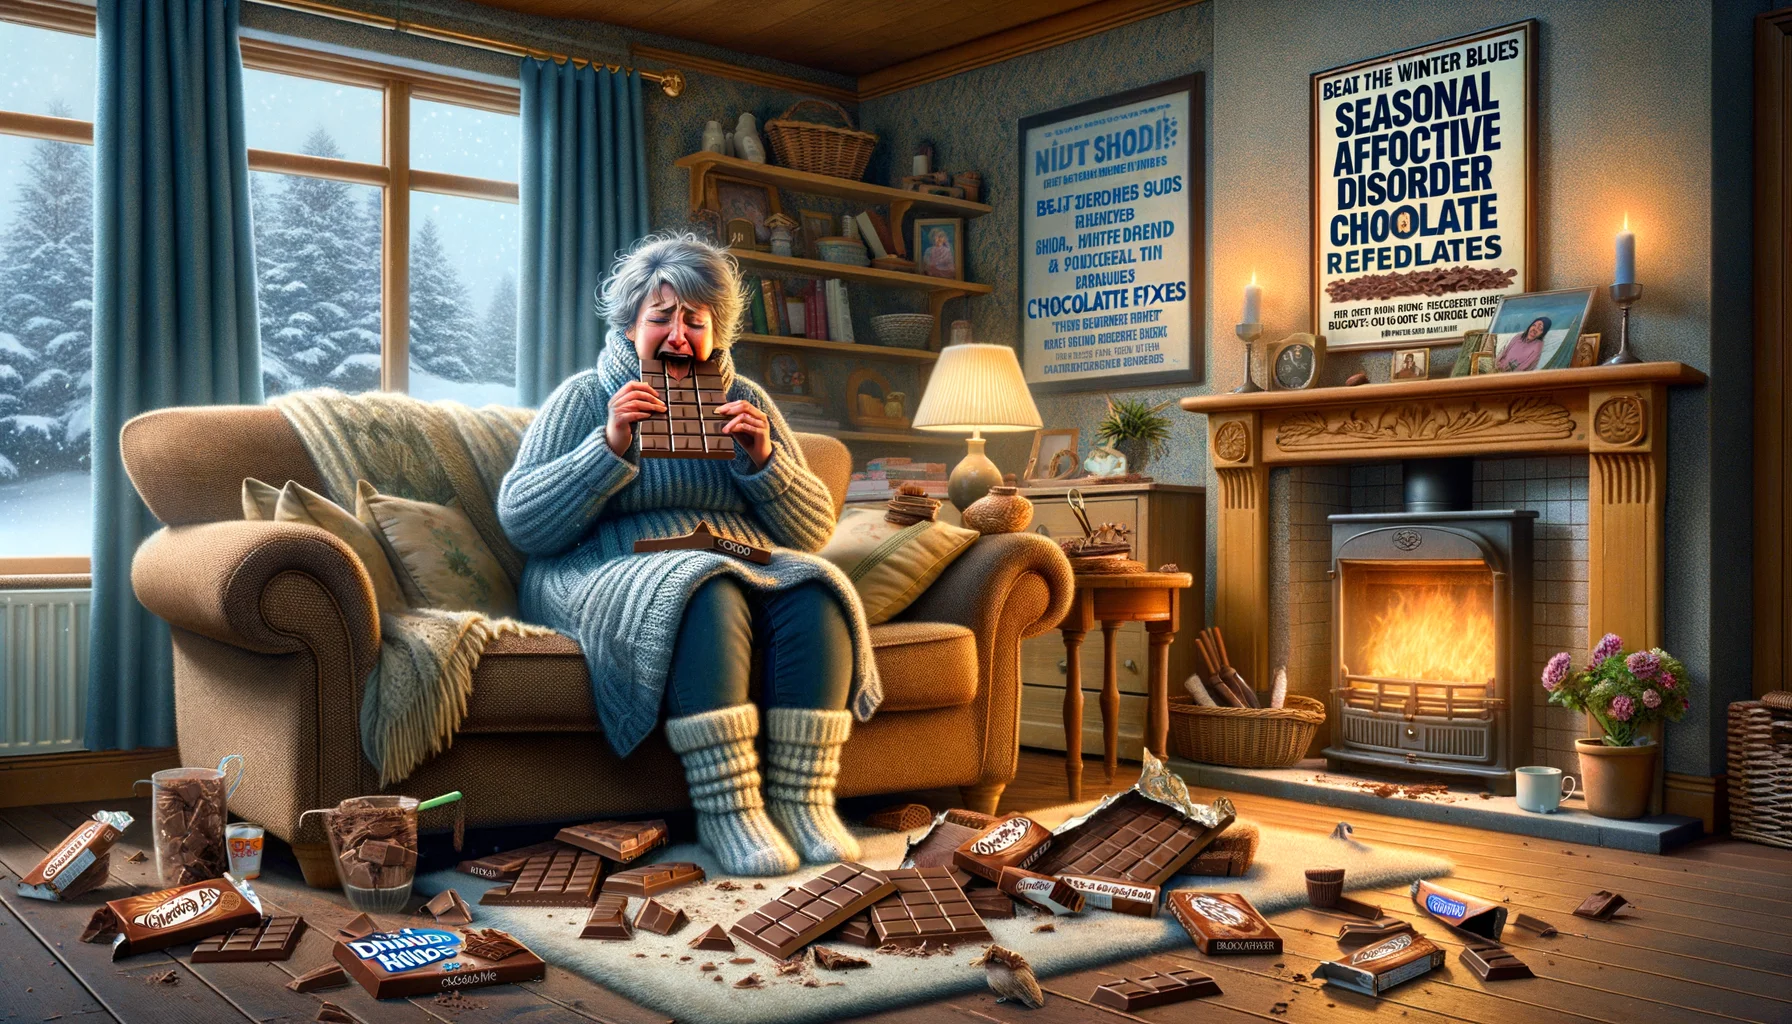 Imagine a humorously realistic scenario that perfectly illustrates 'Seasonal Affective Disorder Chocolate Remedies'. Picture a cozy room with a fireplace on a cold winter day. A middle-aged Caucasian woman is bundled up in warm clothing, sitting comfortably on a plush sofa. In her hand is a large bar of chocolate, which she bites into with an exaggerated look of relief on her face. Nearby is a pile of empty chocolate wrappers - humorous evidence of her numerous 'remedies'. A table next to her holds a poster with a mock advertisement saying 'Beat the Winter Blues with Chocolate Fixes'. Add elements that bring levity and light-heartedness into the scenario.